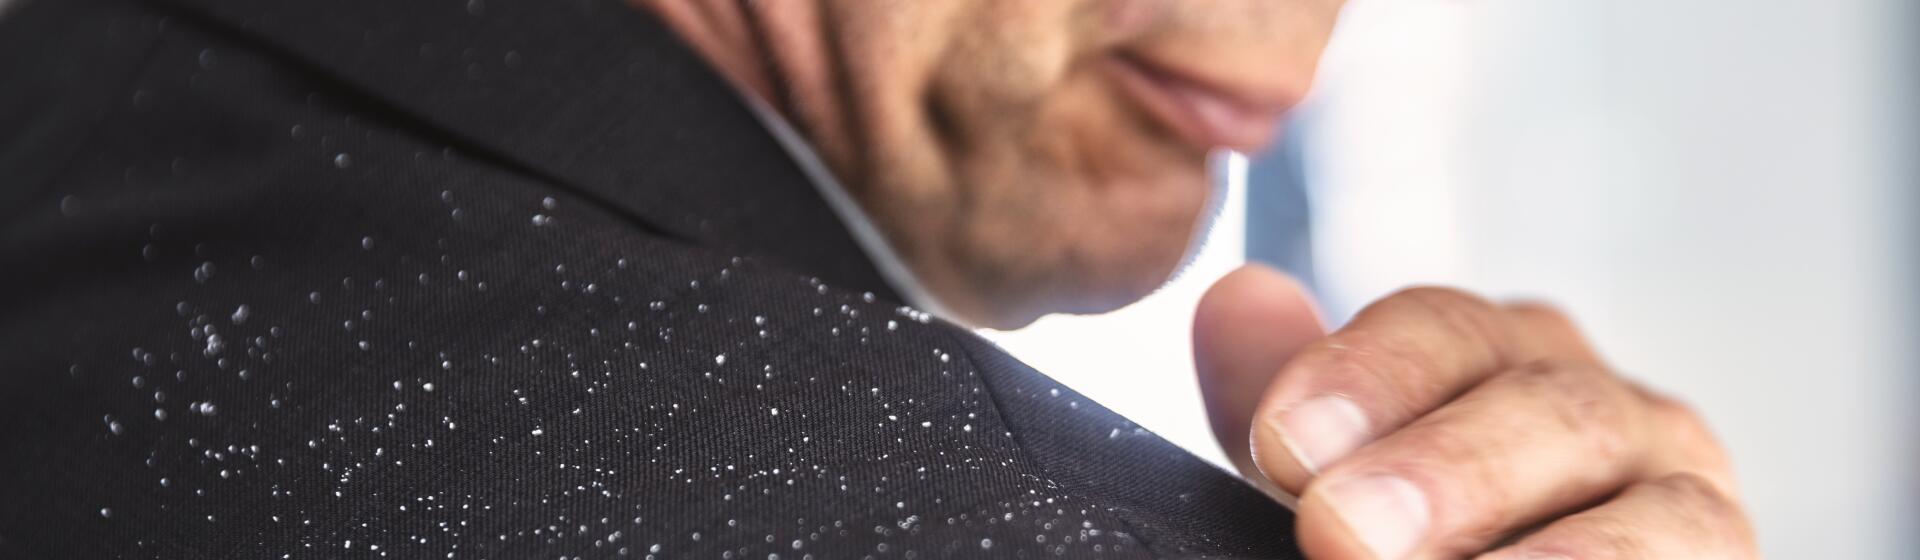 Dandruff in the hair: causes & treatments